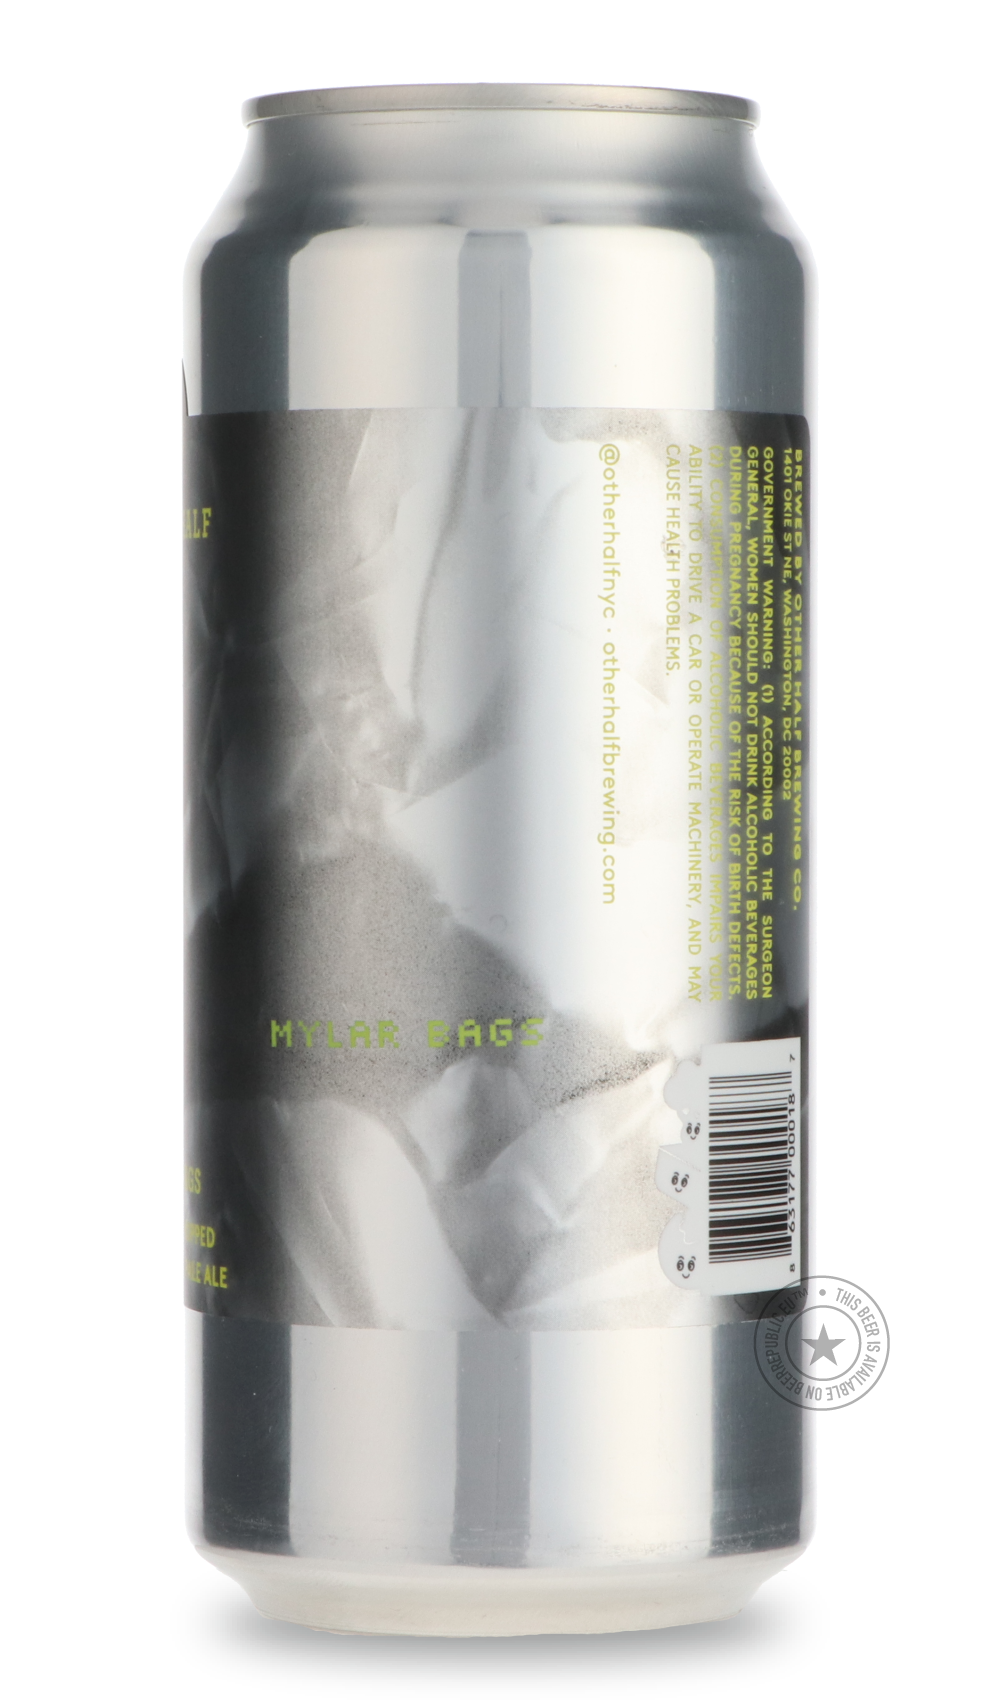 -Other Half- Mylar Bags-IPA- Only @ Beer Republic - The best online beer store for American & Canadian craft beer - Buy beer online from the USA and Canada - Bier online kopen - Amerikaans bier kopen - Craft beer store - Craft beer kopen - Amerikanisch bier kaufen - Bier online kaufen - Acheter biere online - IPA - Stout - Porter - New England IPA - Hazy IPA - Imperial Stout - Barrel Aged - Barrel Aged Imperial Stout - Brown - Dark beer - Blond - Blonde - Pilsner - Lager - Wheat - Weizen - Amber - Barley Wi